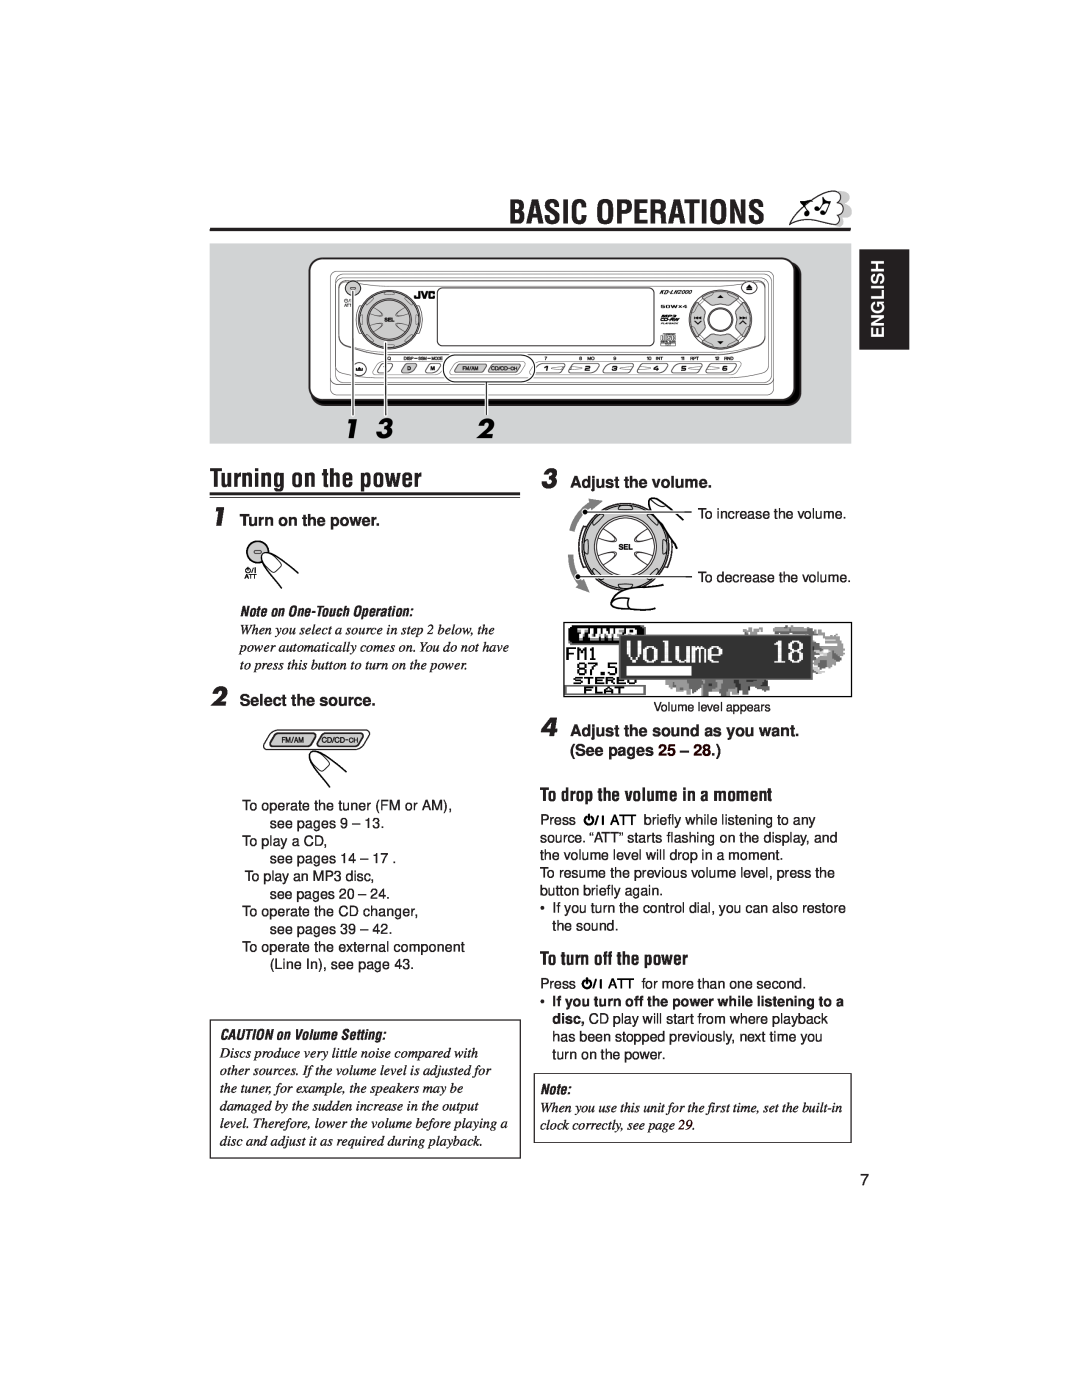 JVC IKD-LH2000 Basic Operations, Turning on the power, English, To drop the volume in a moment, To turn off the power 